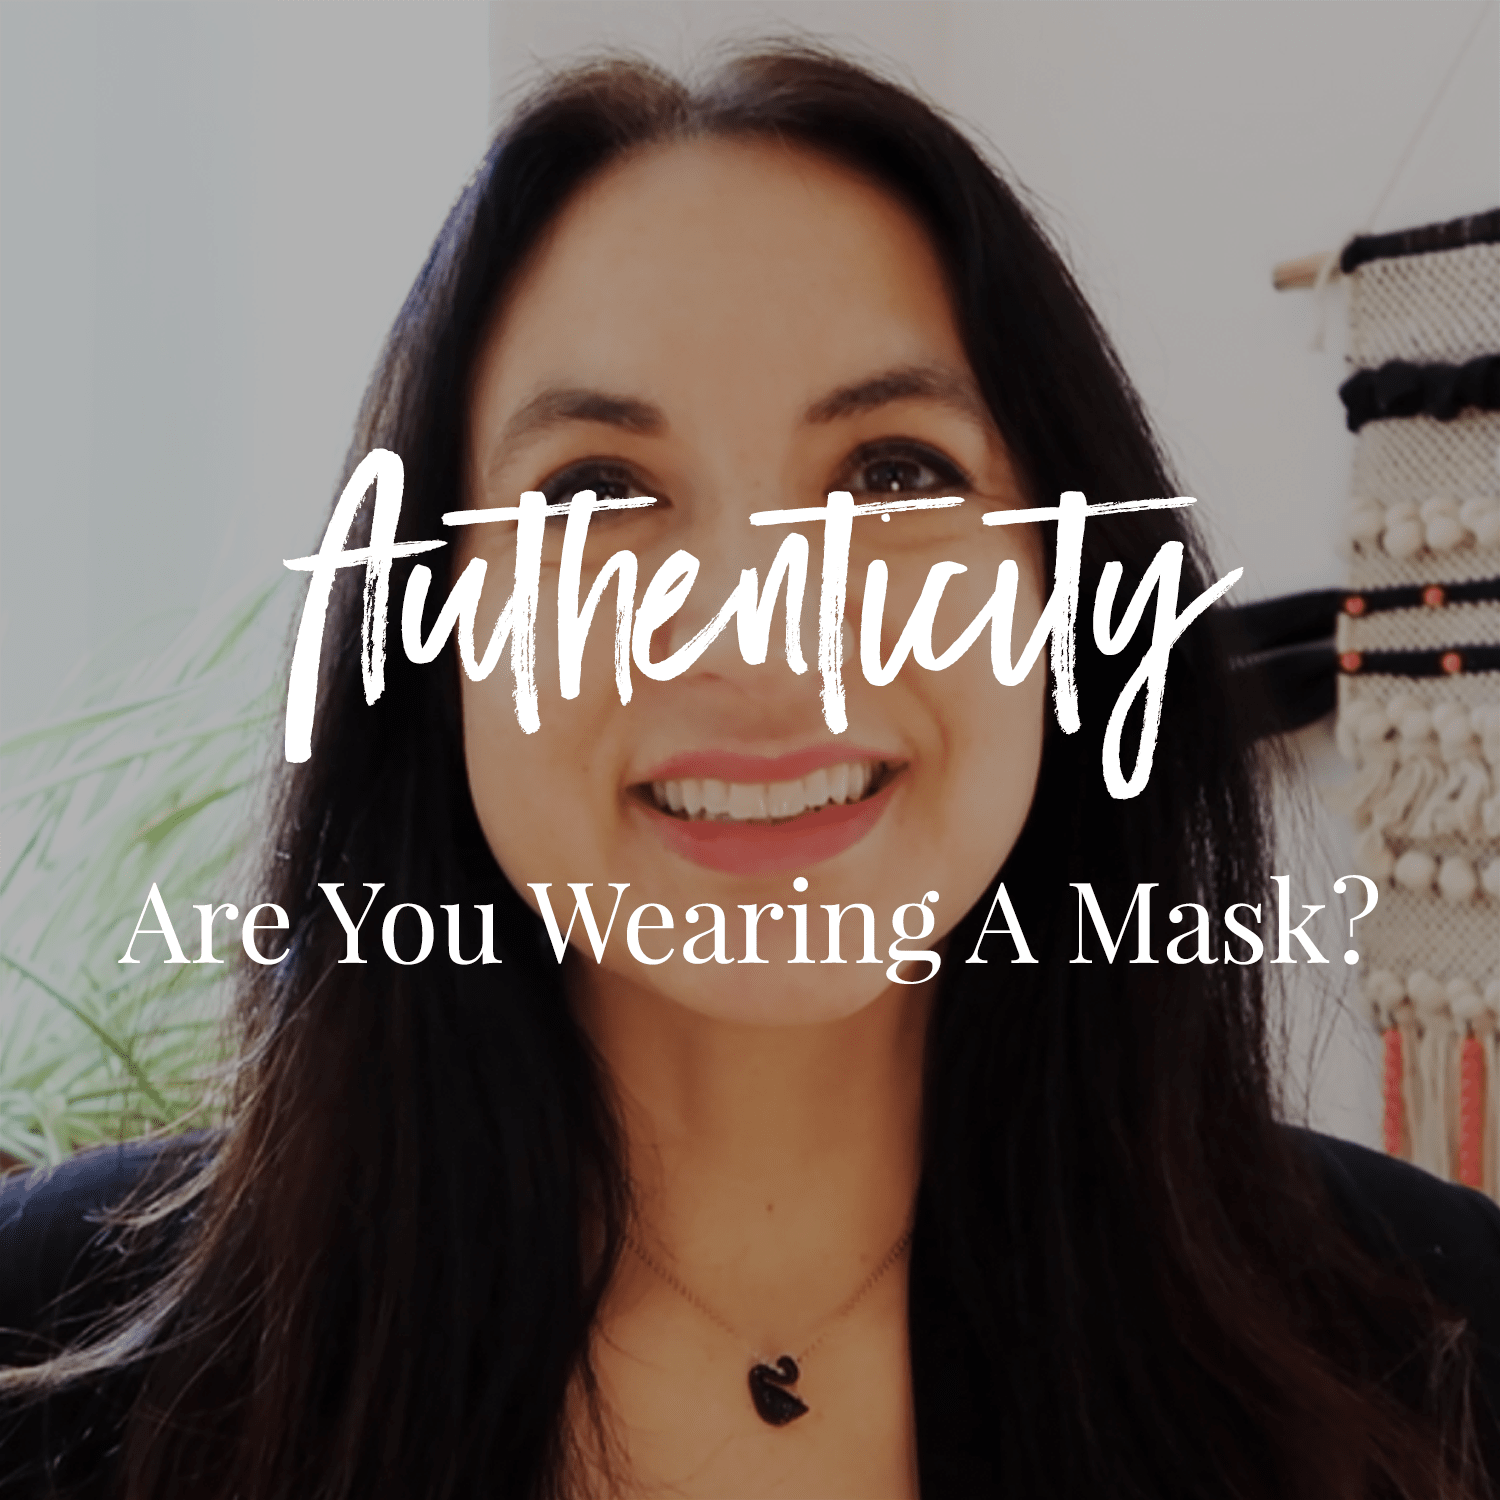 Authenticity: Are You Wearing A Mask?